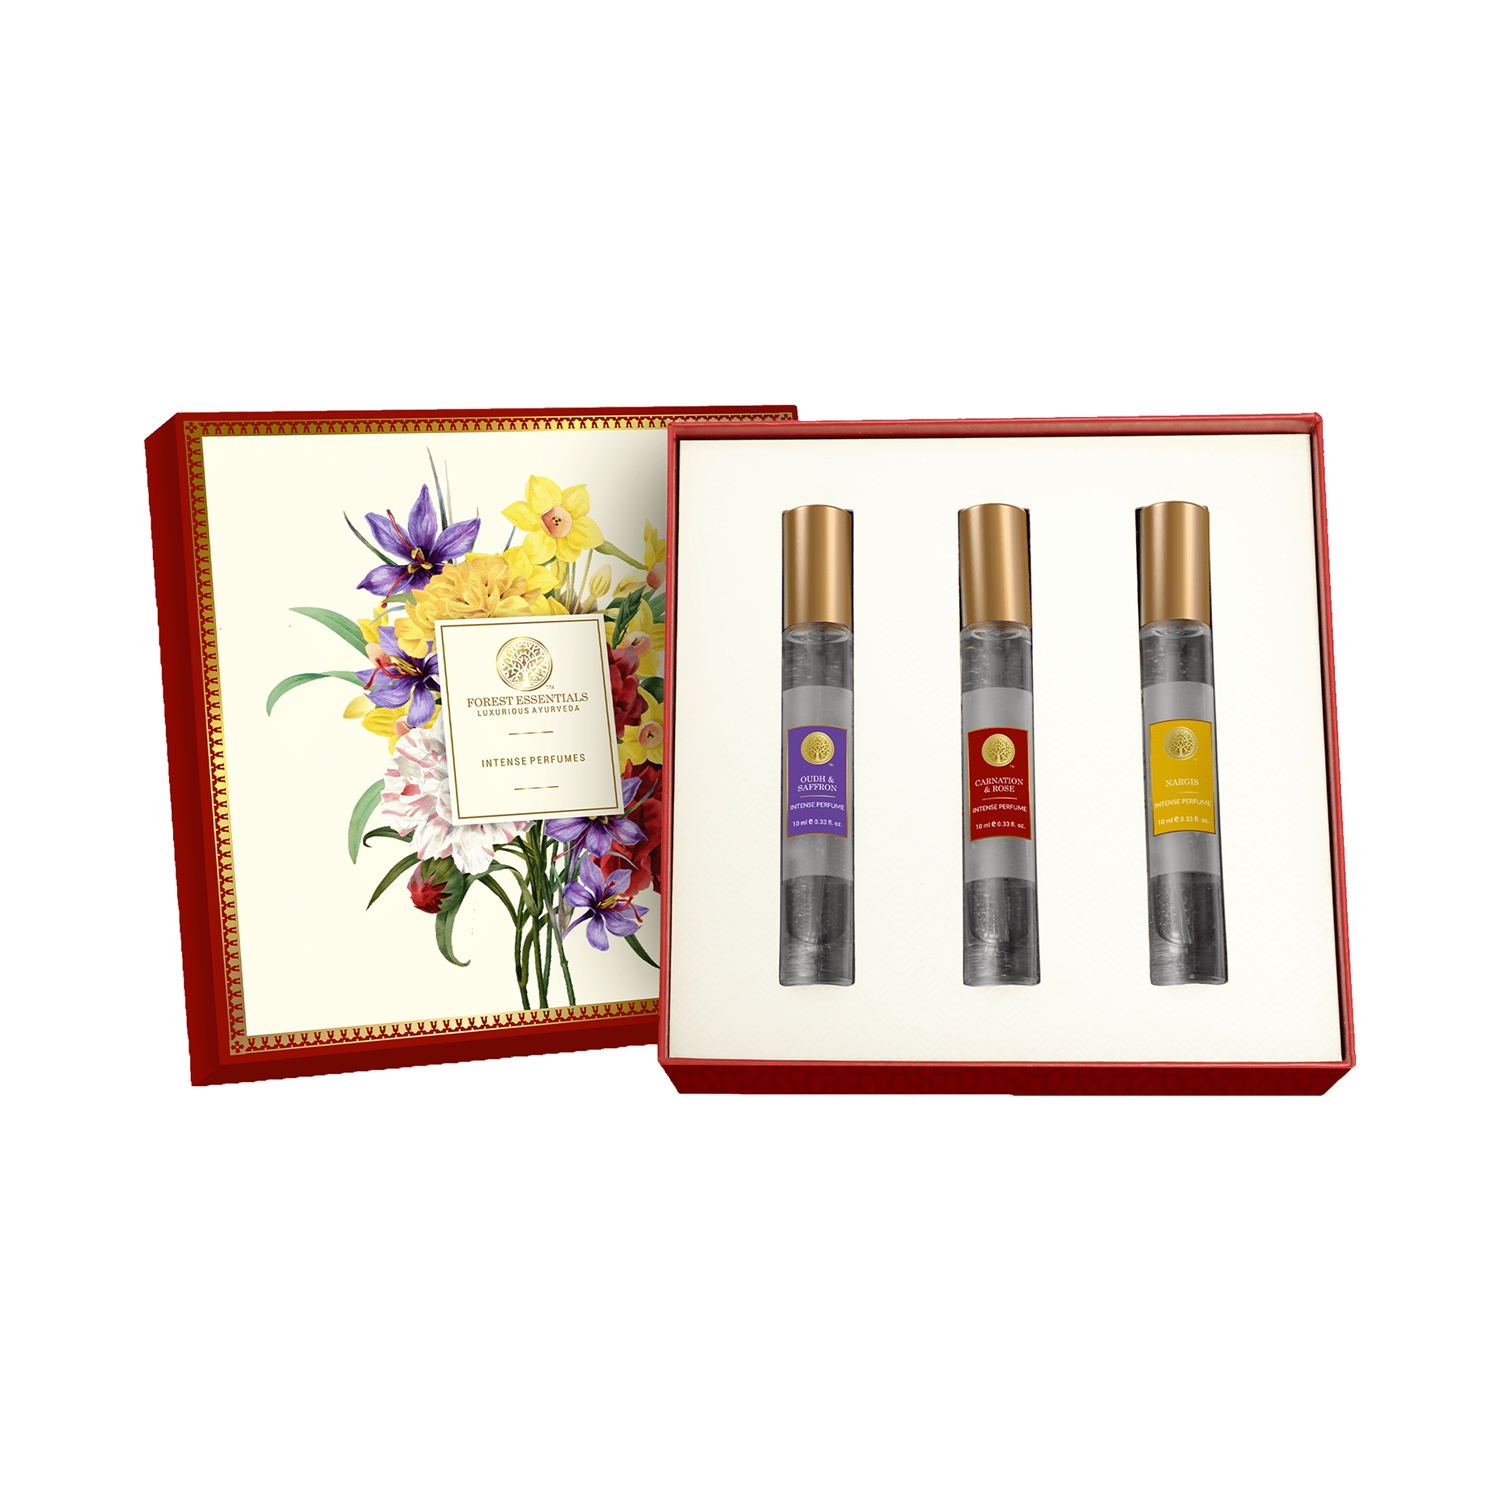 Forest Essentials | Forest Essentials Intense Perfume Selection Box (1Pc)